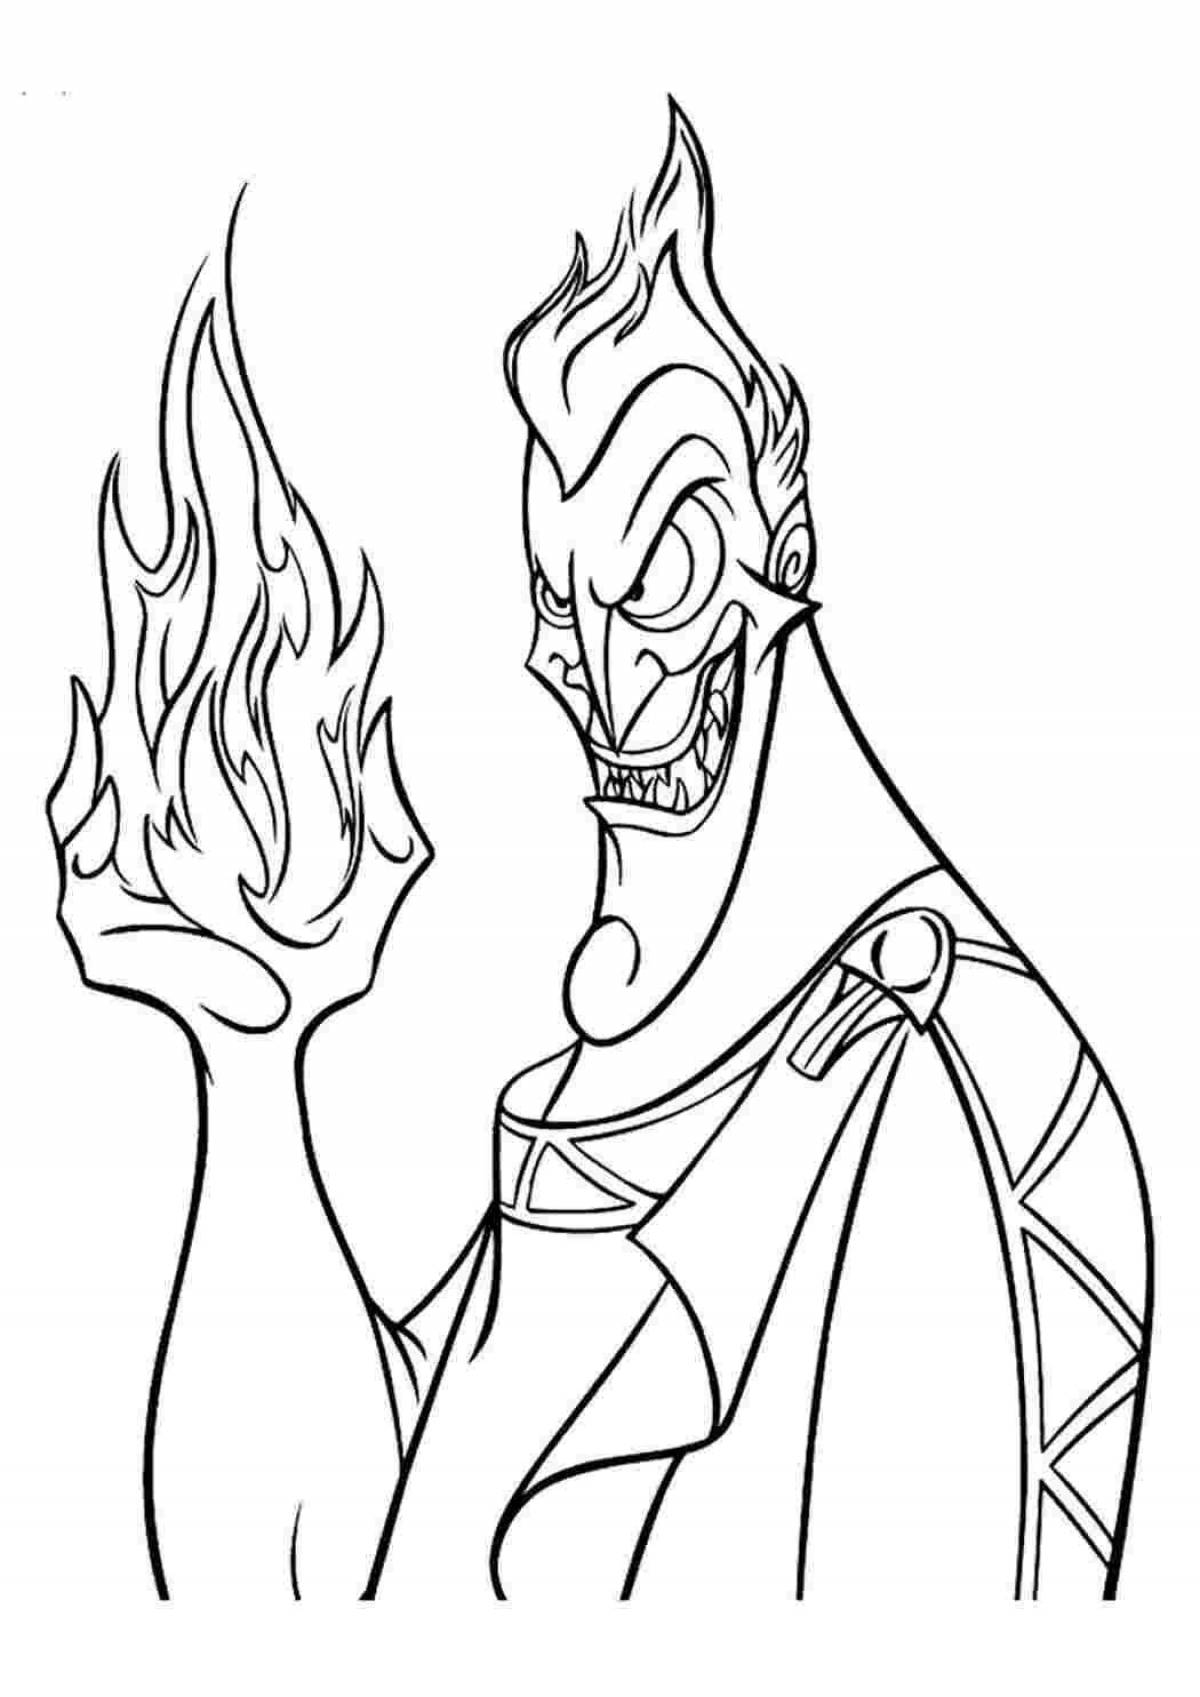 Sinister villains coloring pages